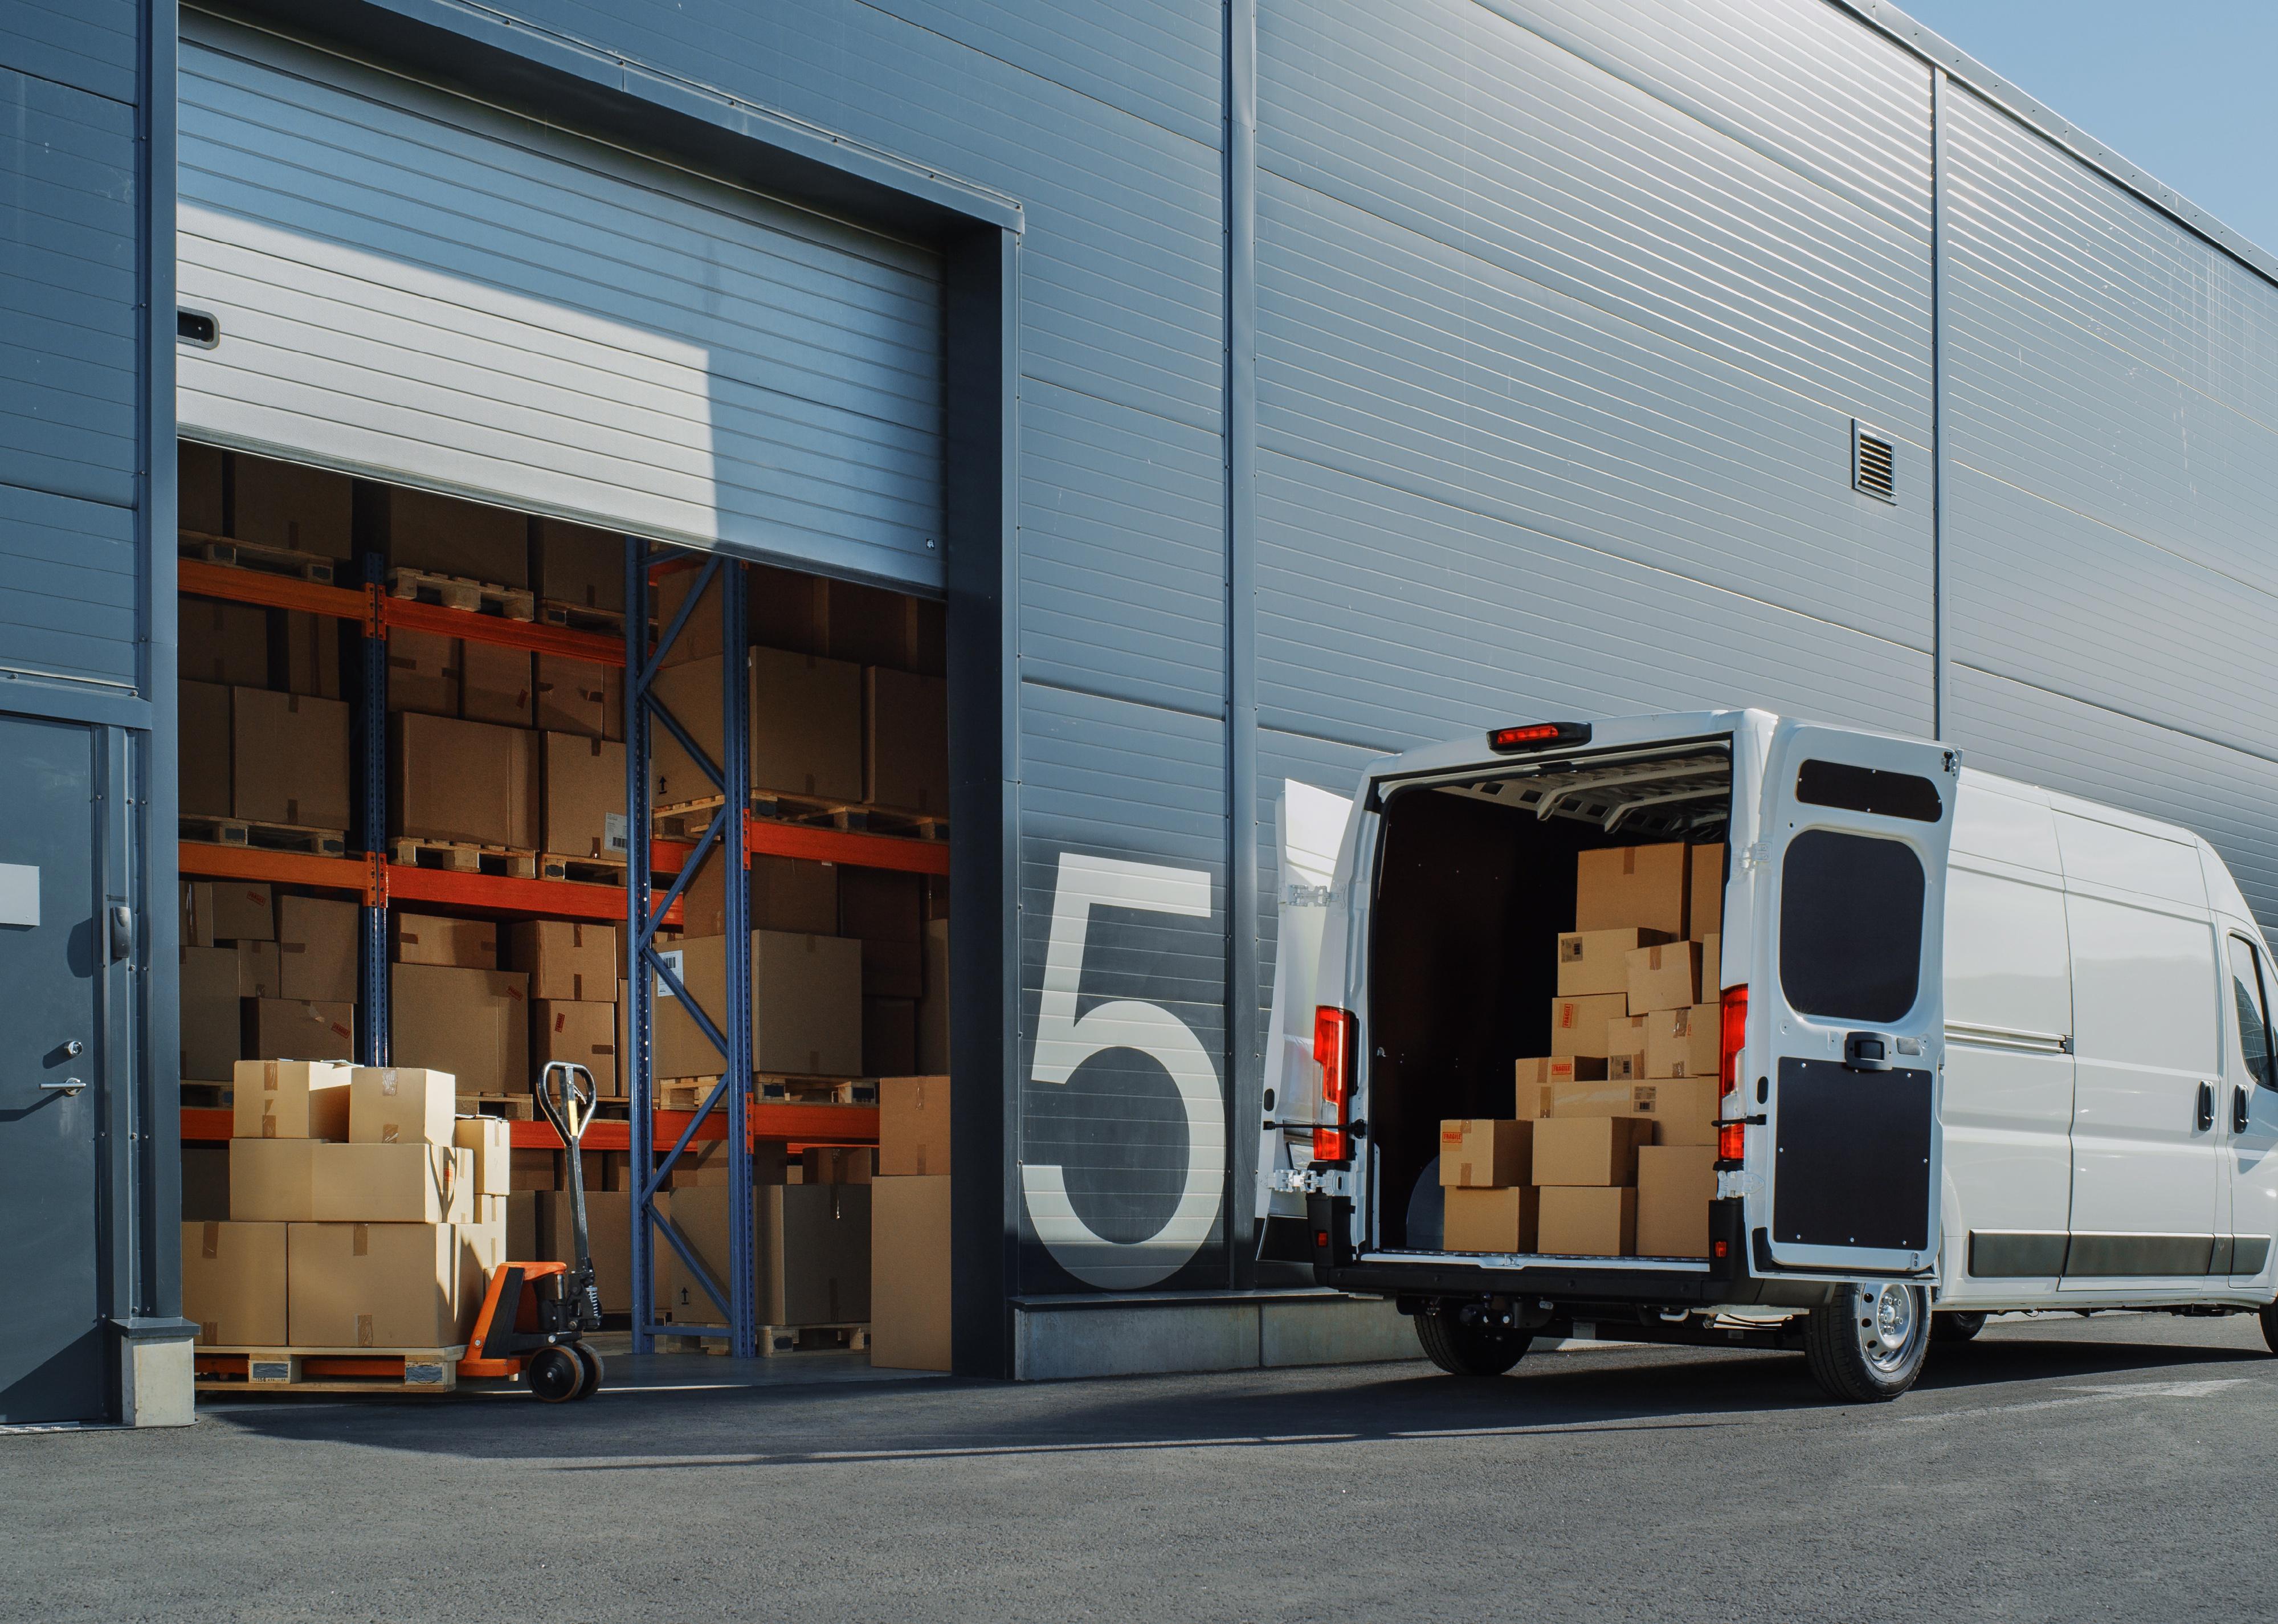 Delivery van loaded with cardboard boxes outside of logistics warehouse with open door.